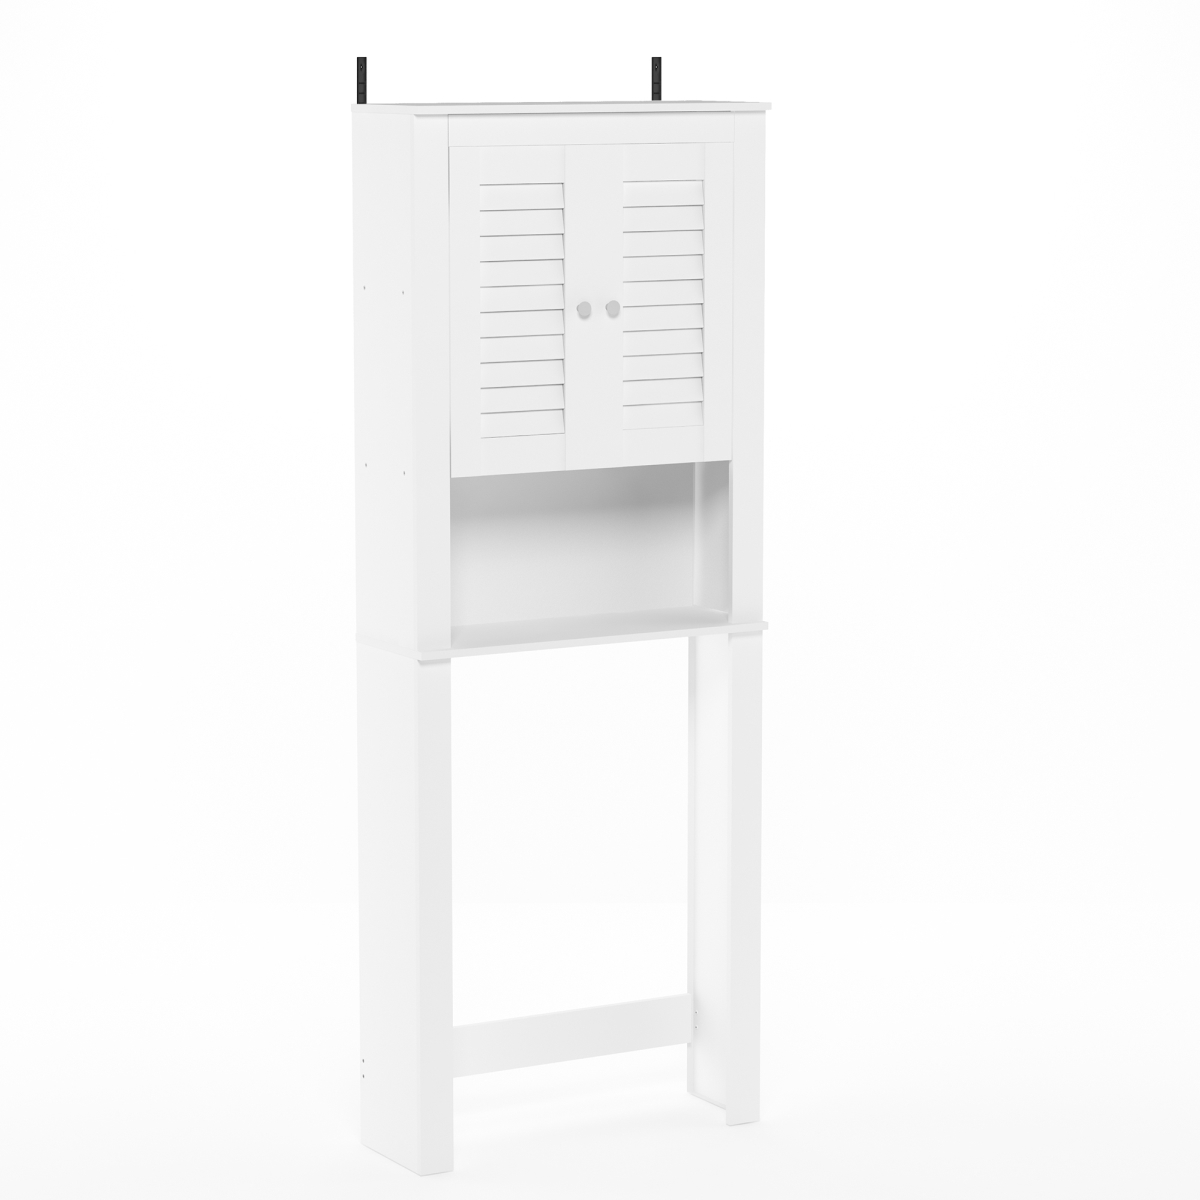 Fr18515wh Indo Louver Door Bath Cabinet - White - 62.99 X 23.62 X 8.27 In.